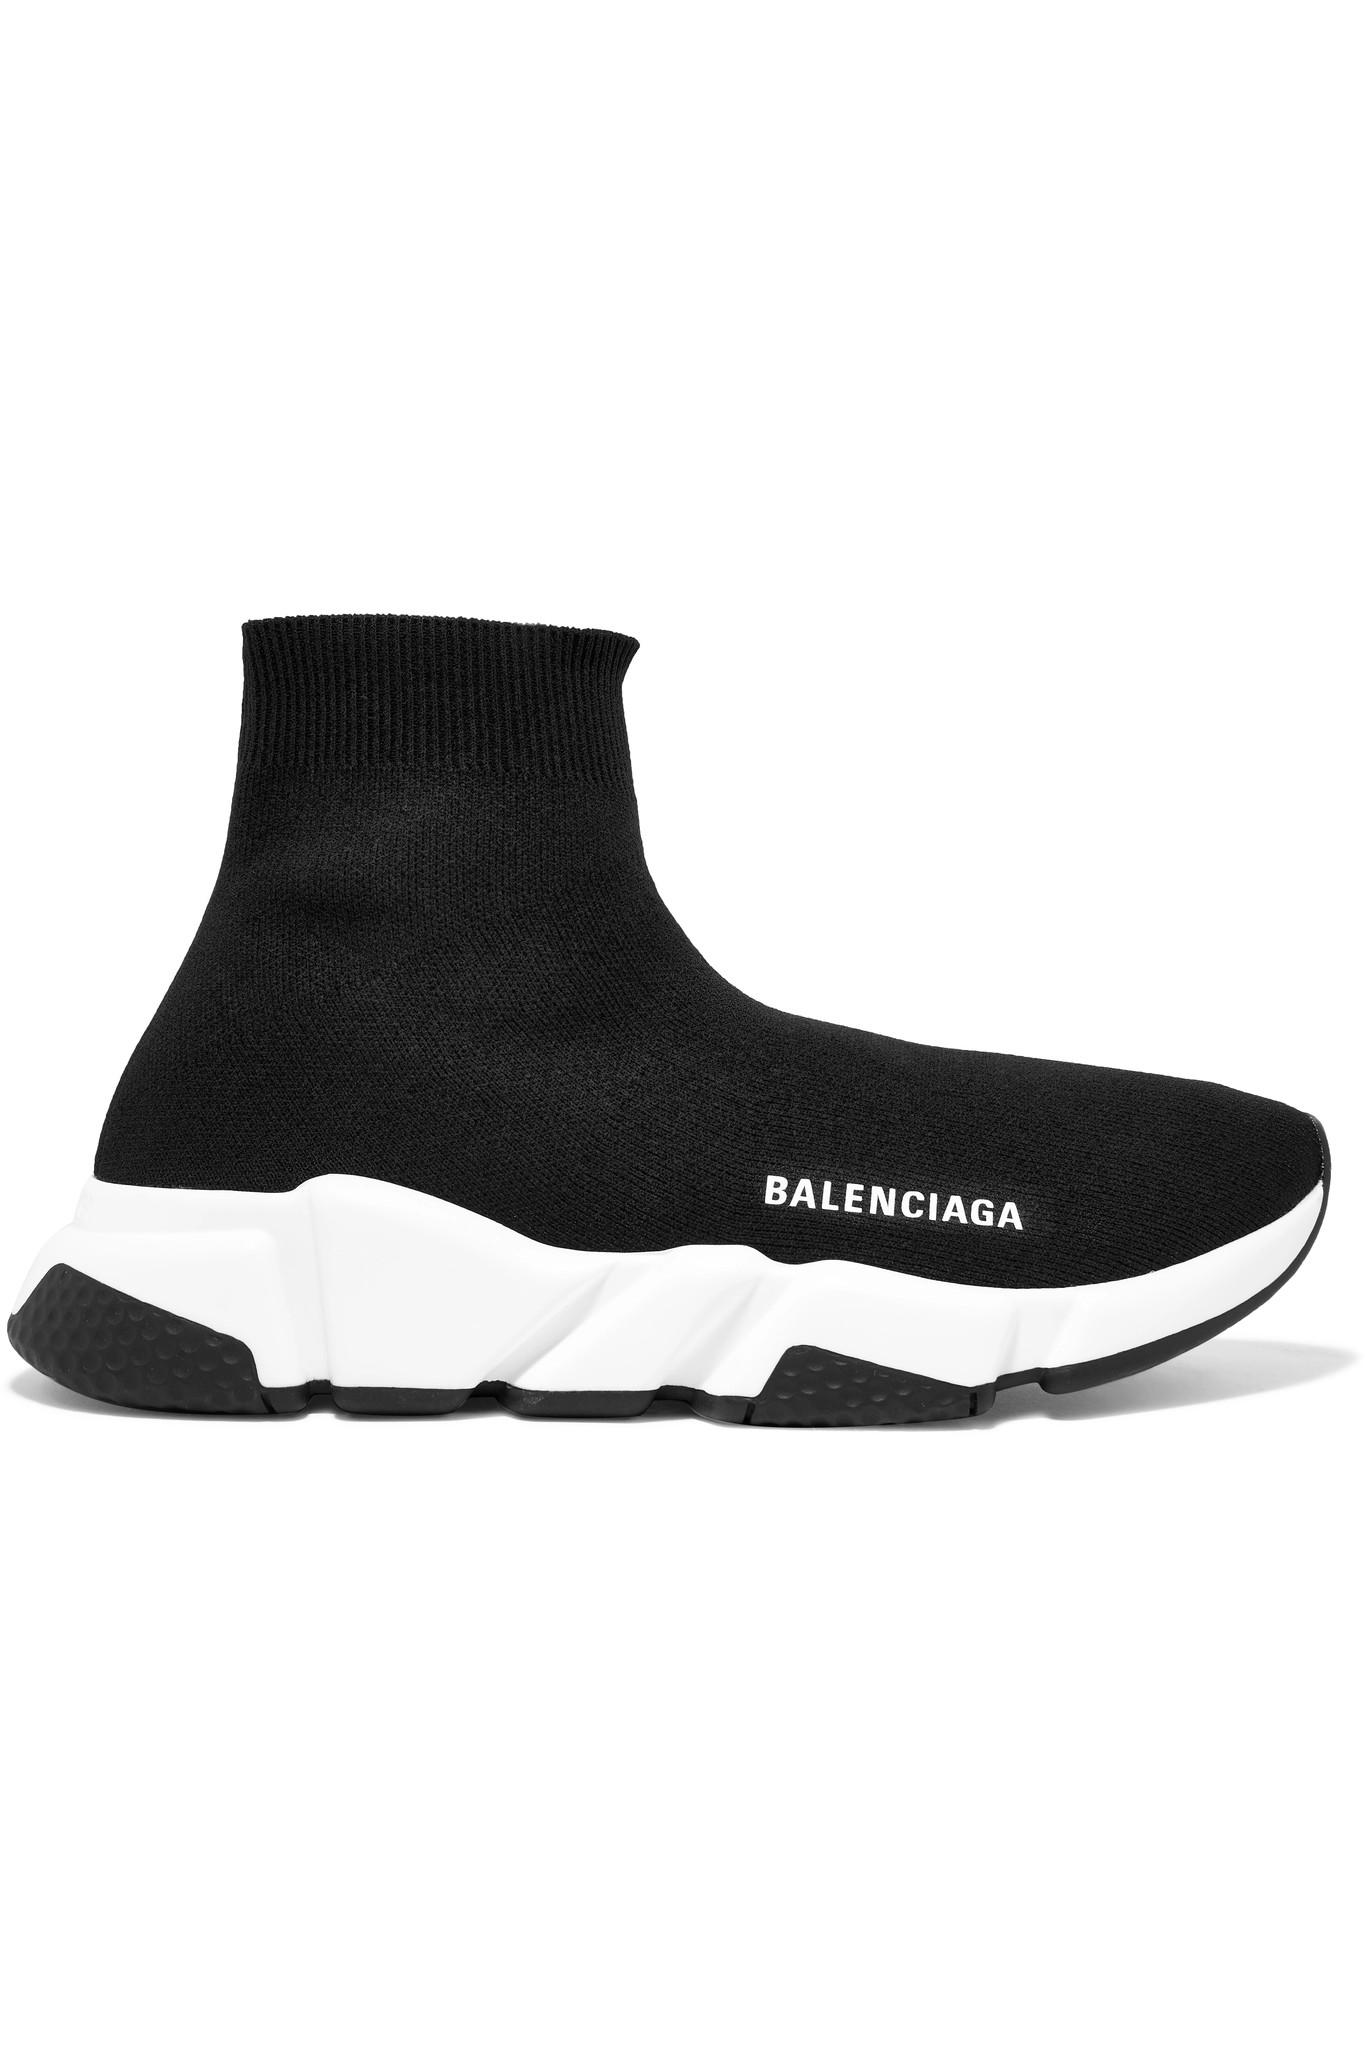 Lyst - Balenciaga Speed Sneakers in Black - Save 24.52830188679245%